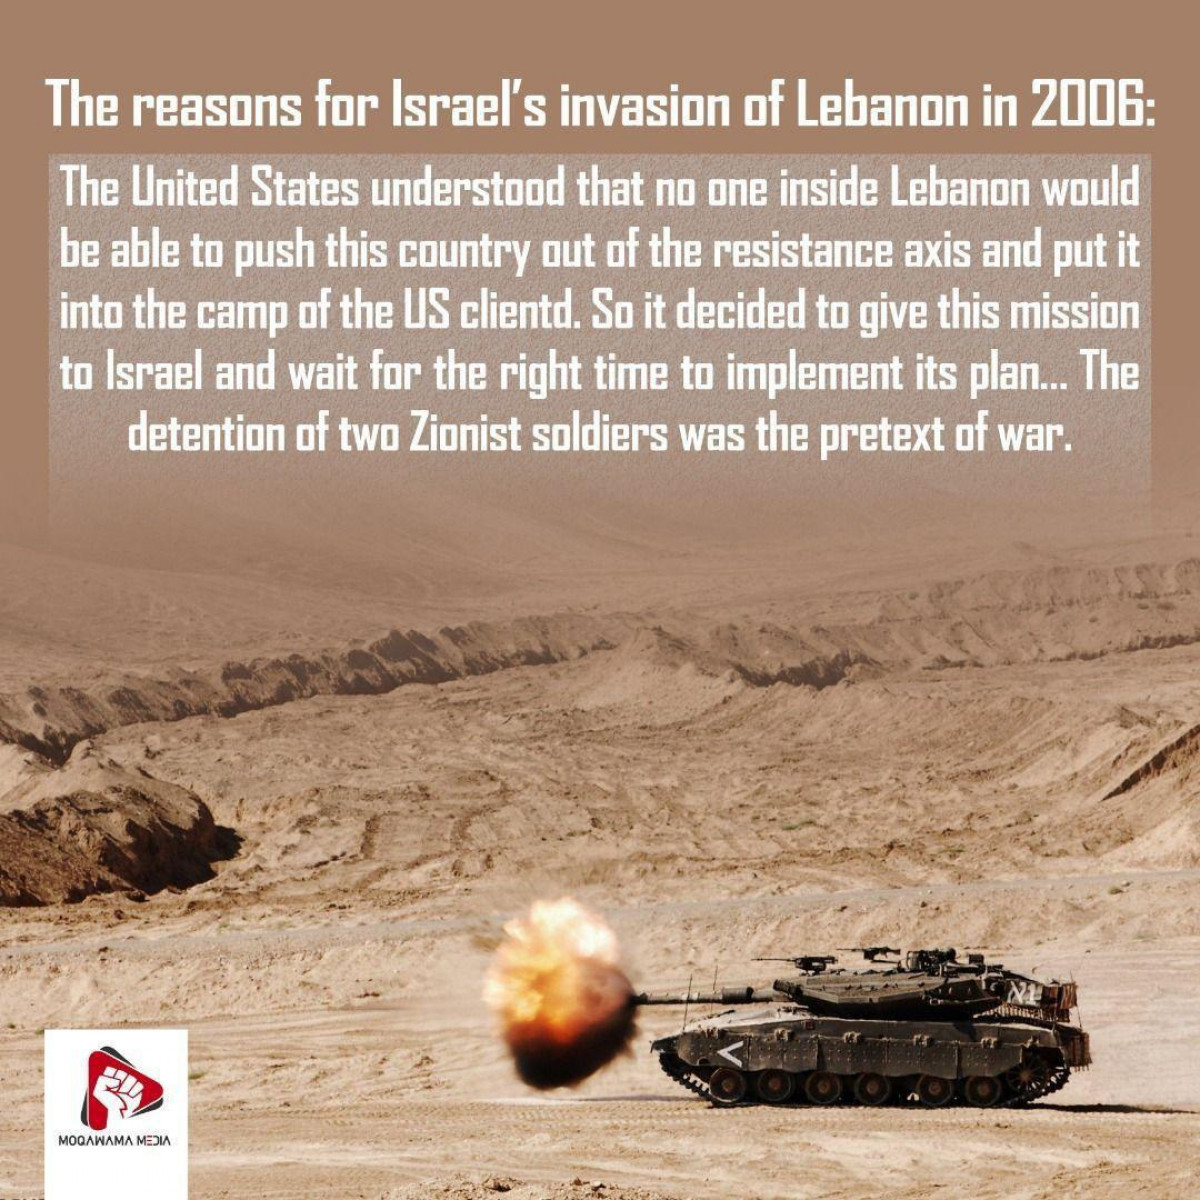 The reasons for Israel’s invasion of Lebanon in 2006: